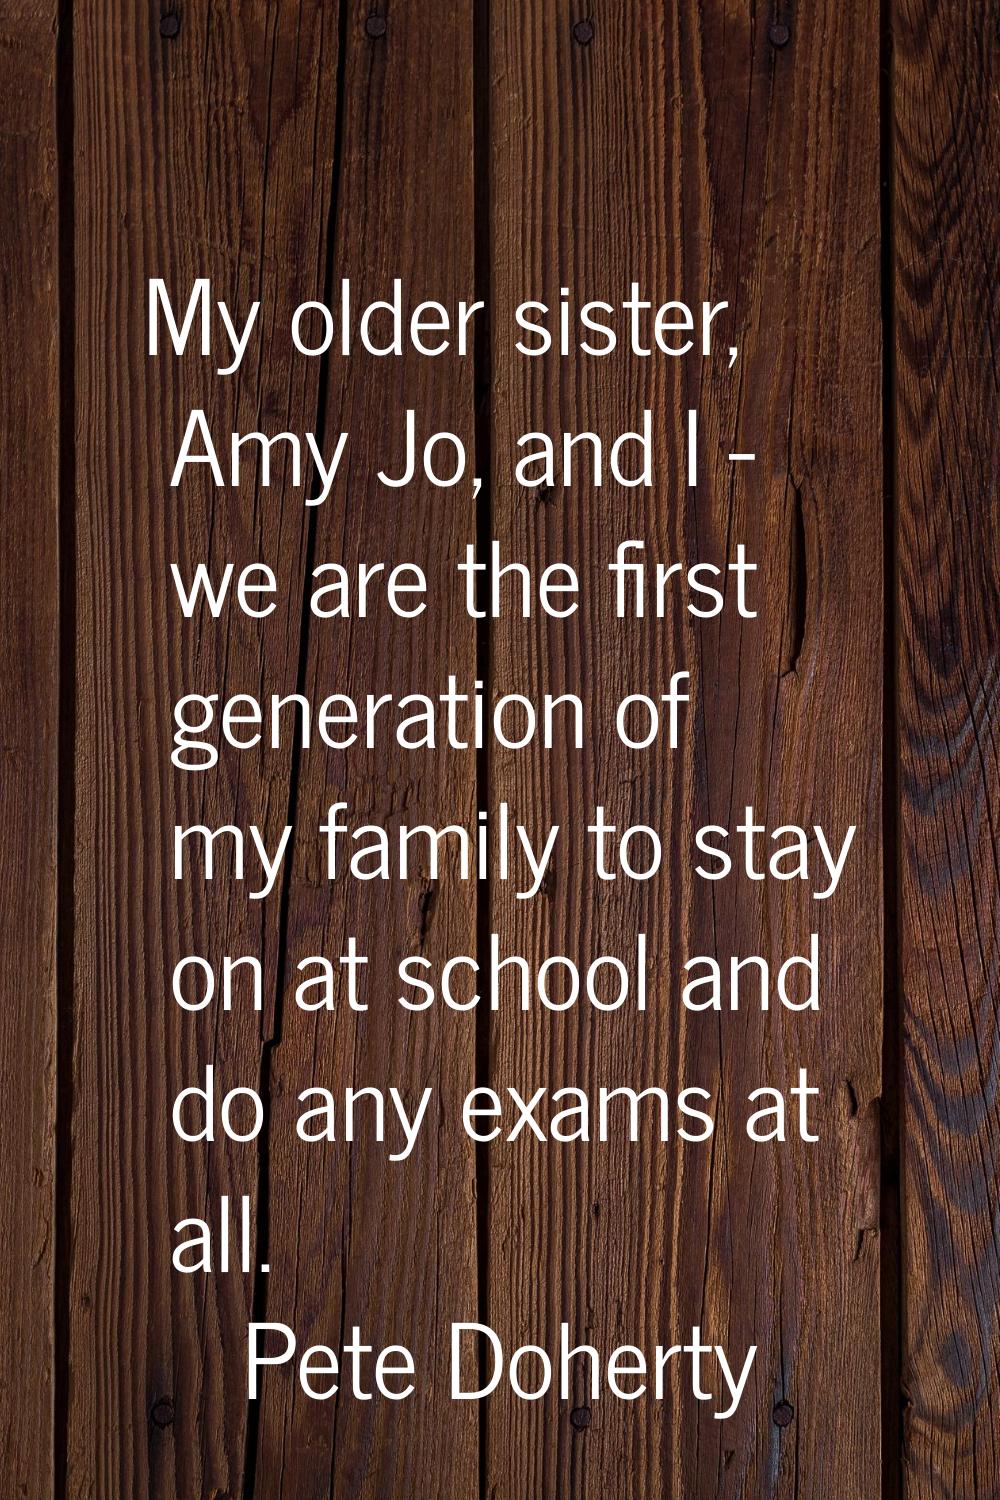 My older sister, Amy Jo, and I - we are the first generation of my family to stay on at school and 